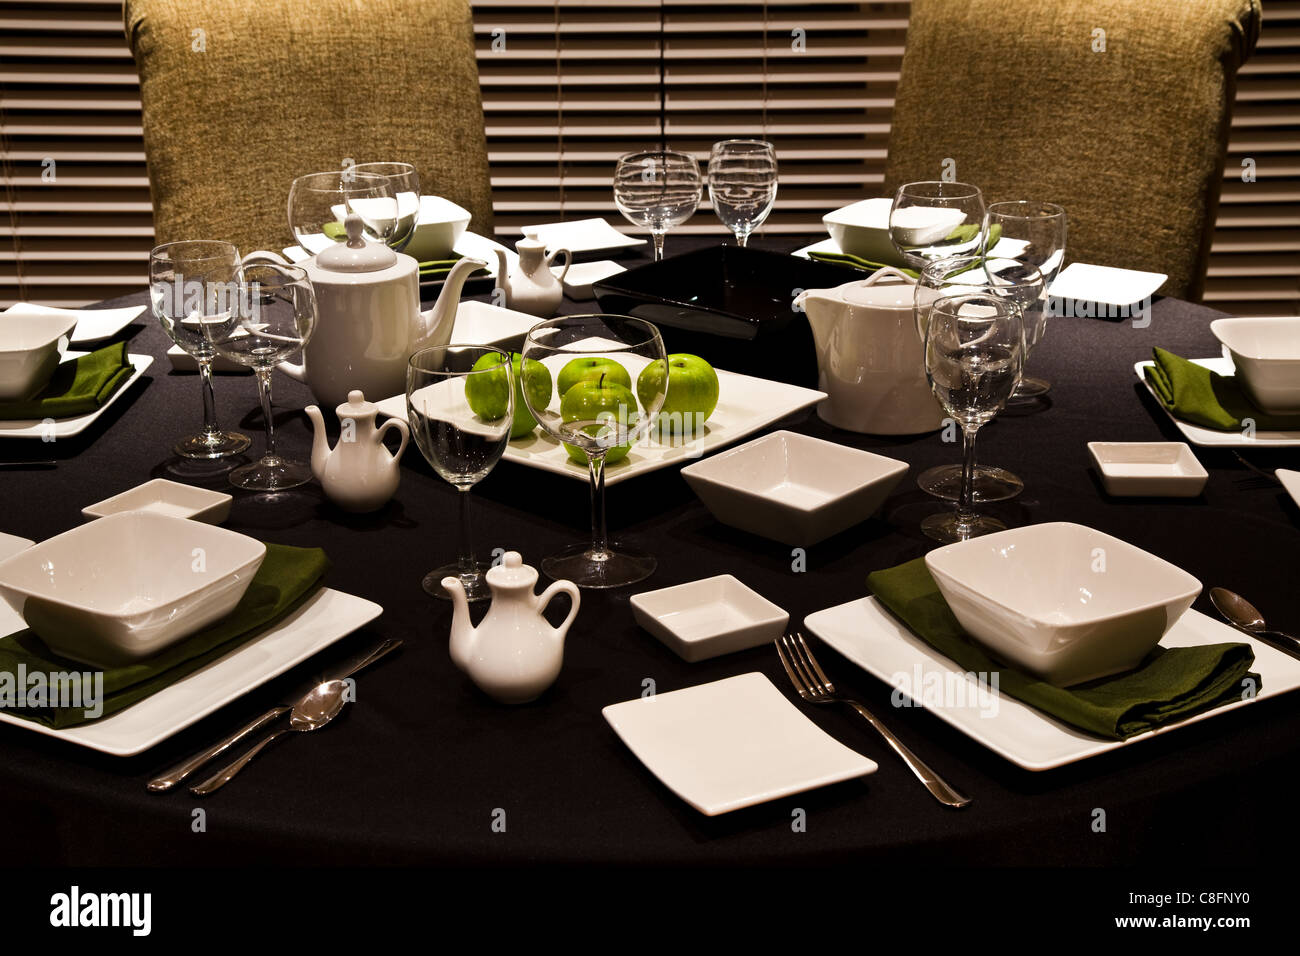 A casual table setting for lunch with an apple theme Stock Photo - Alamy